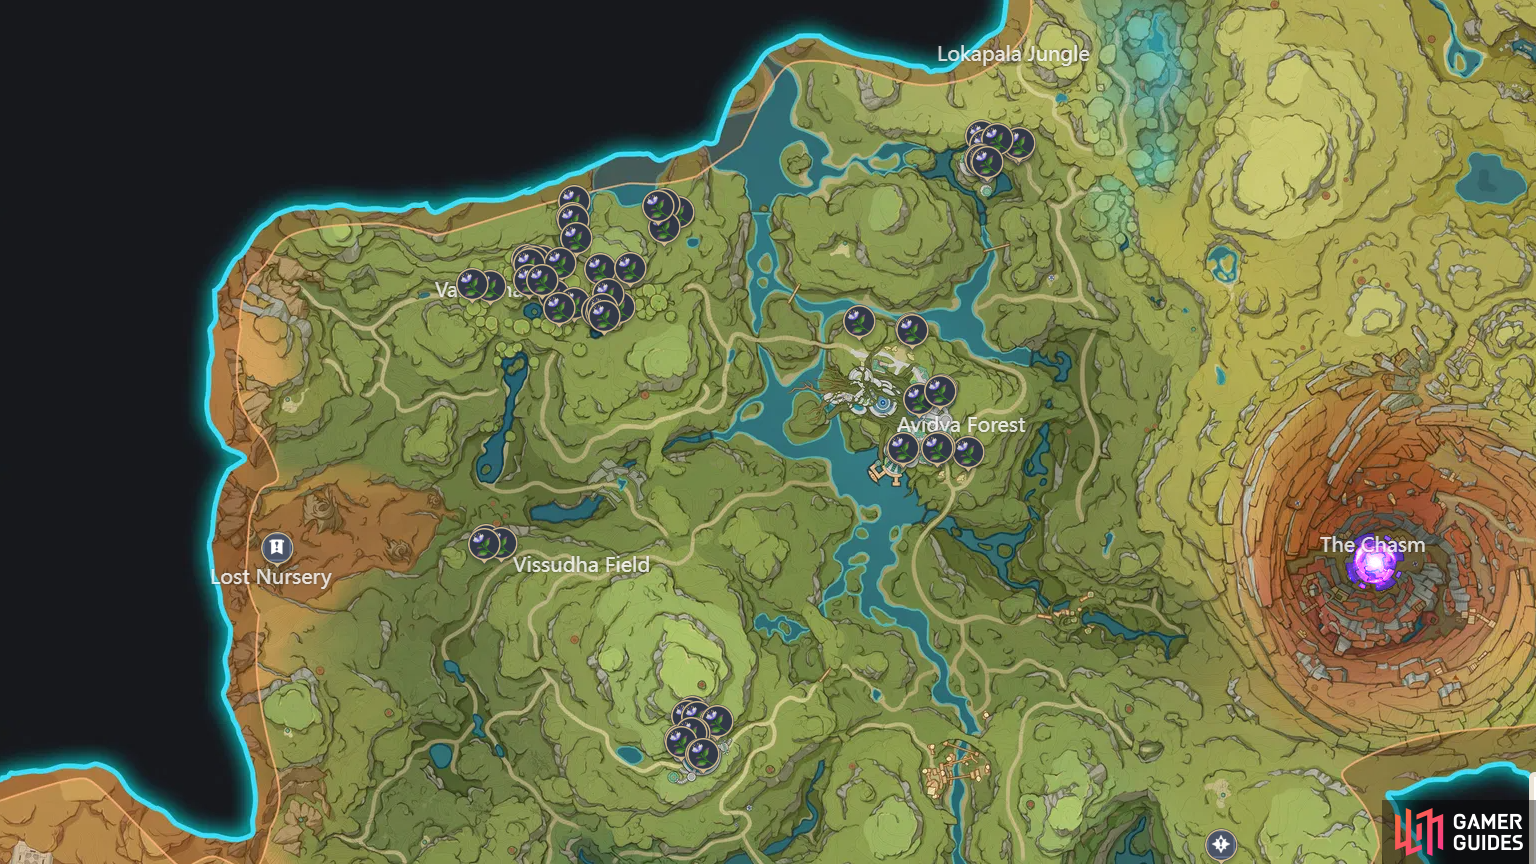 Padisarah locations via the official Teyvat Interactive Map.